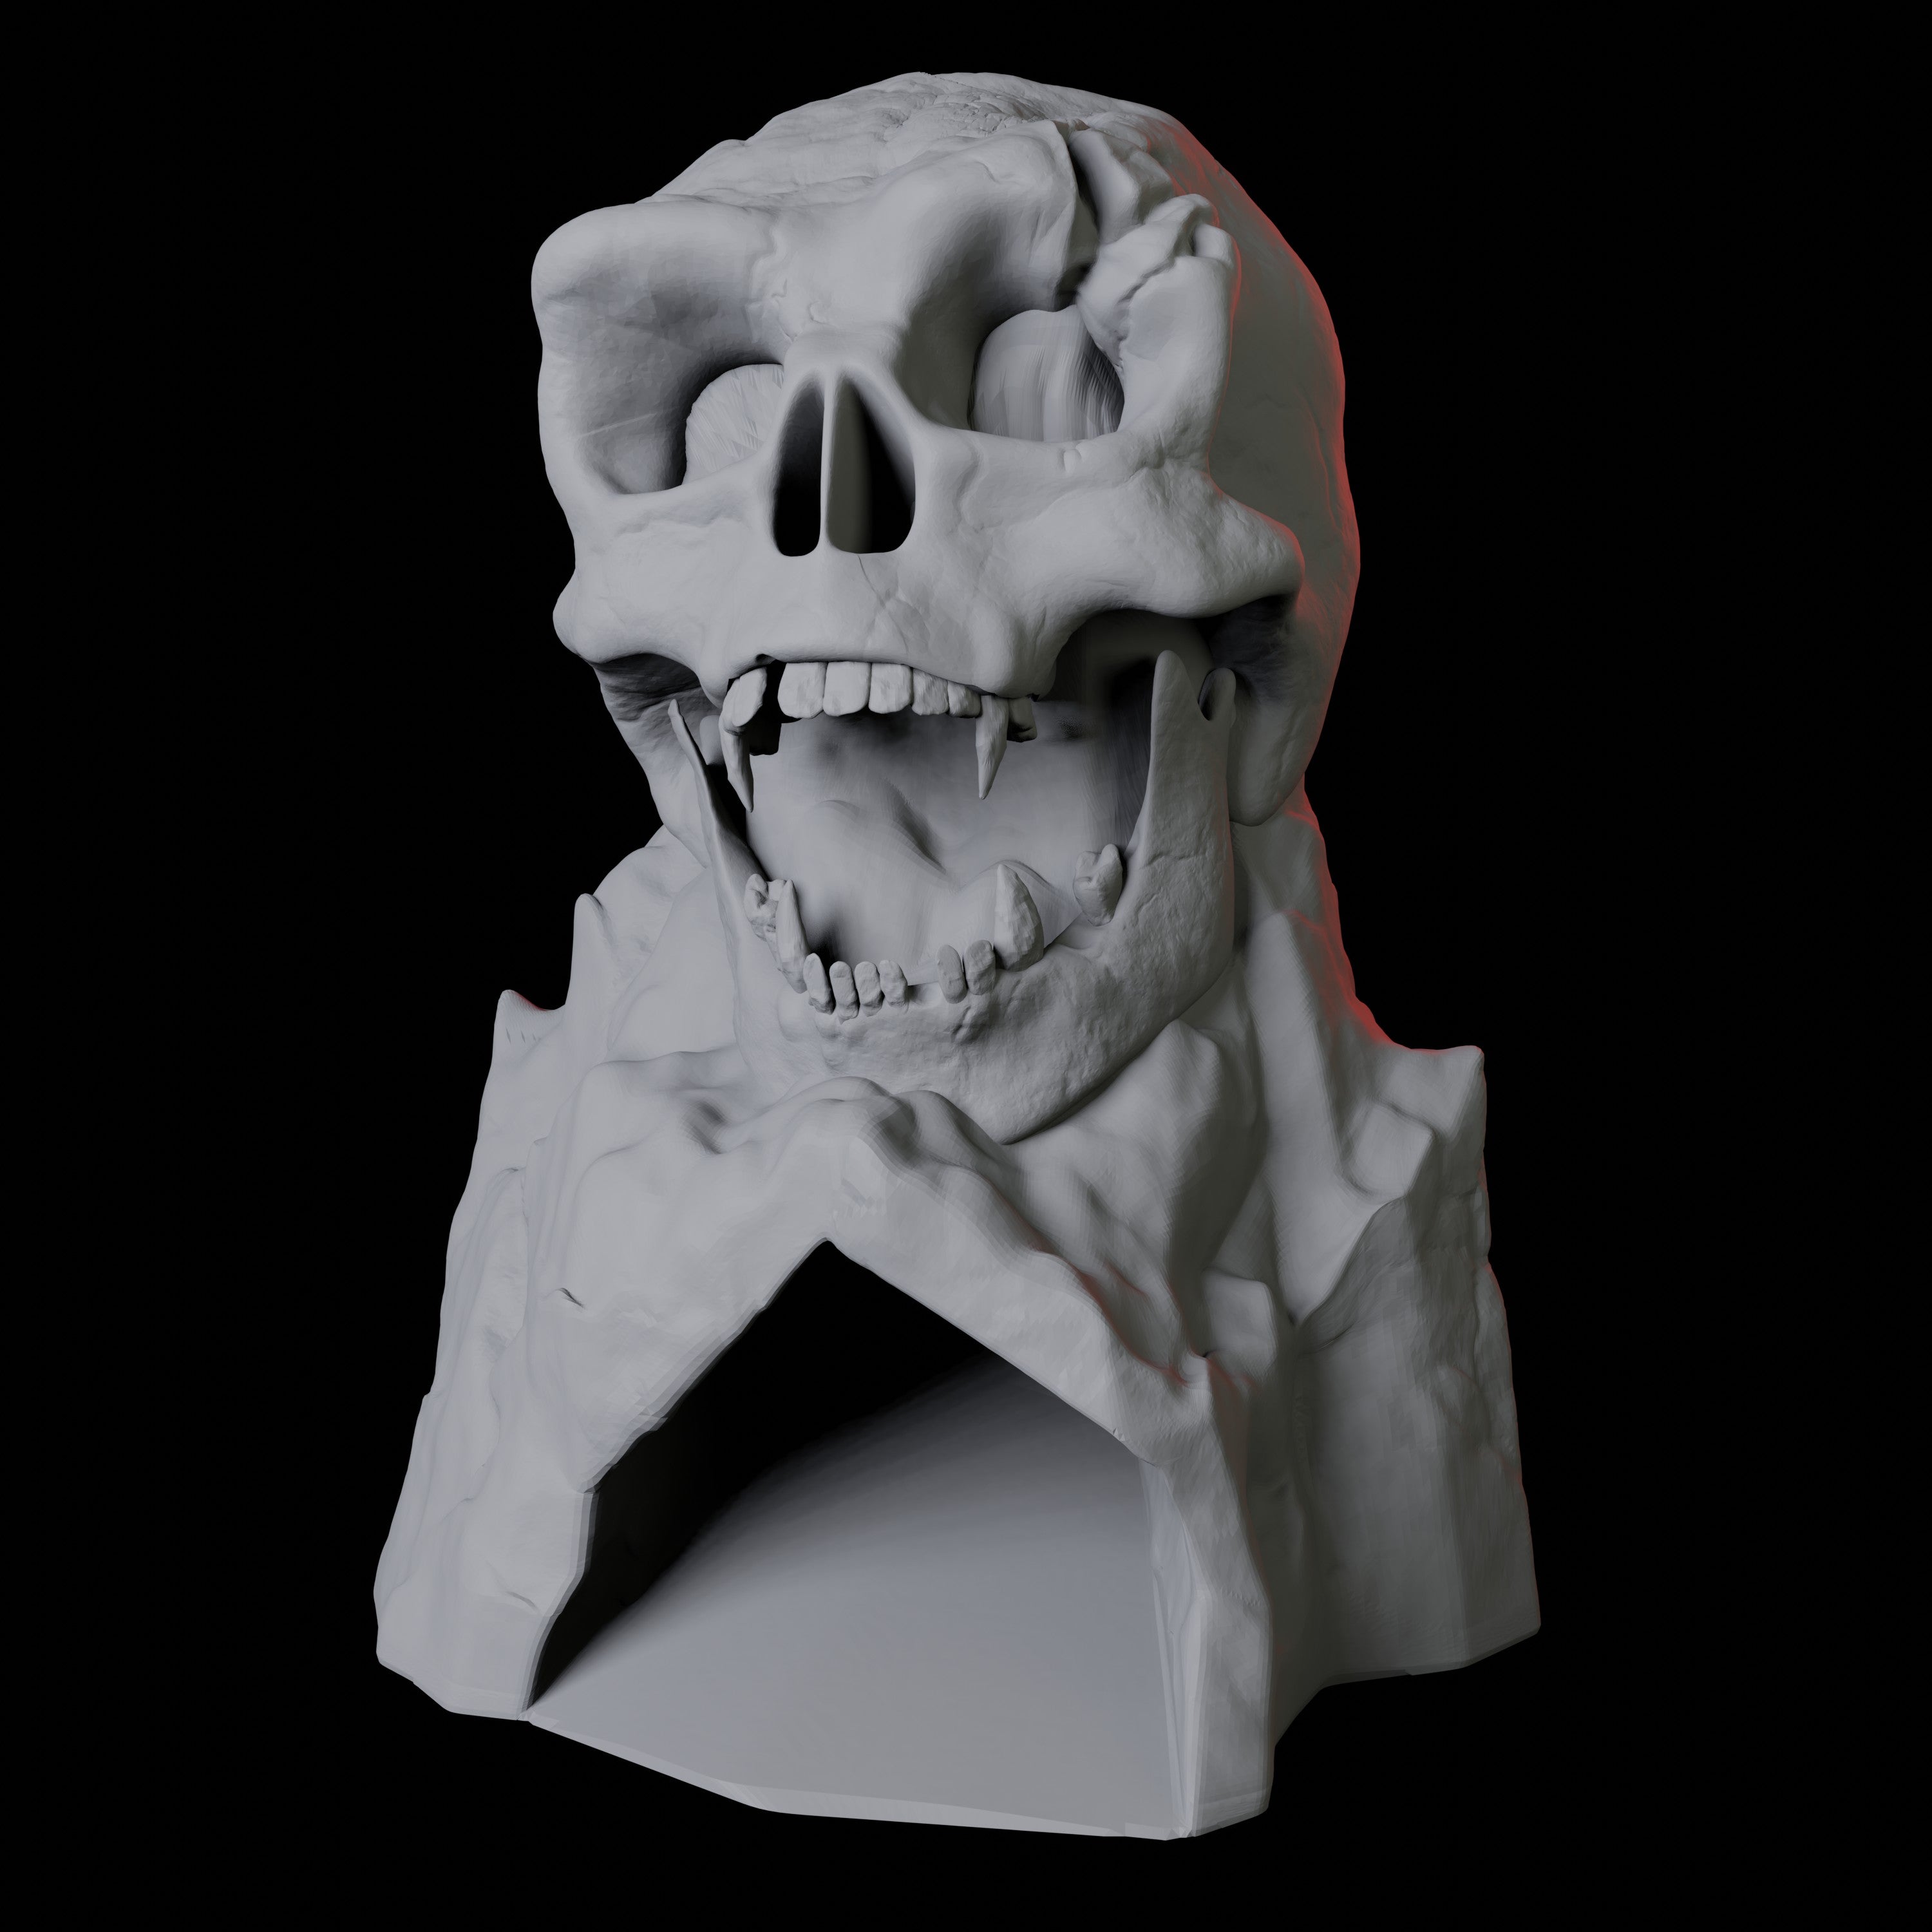 Skull Mountain Dice Tower Miniature for Dungeons and Dragons